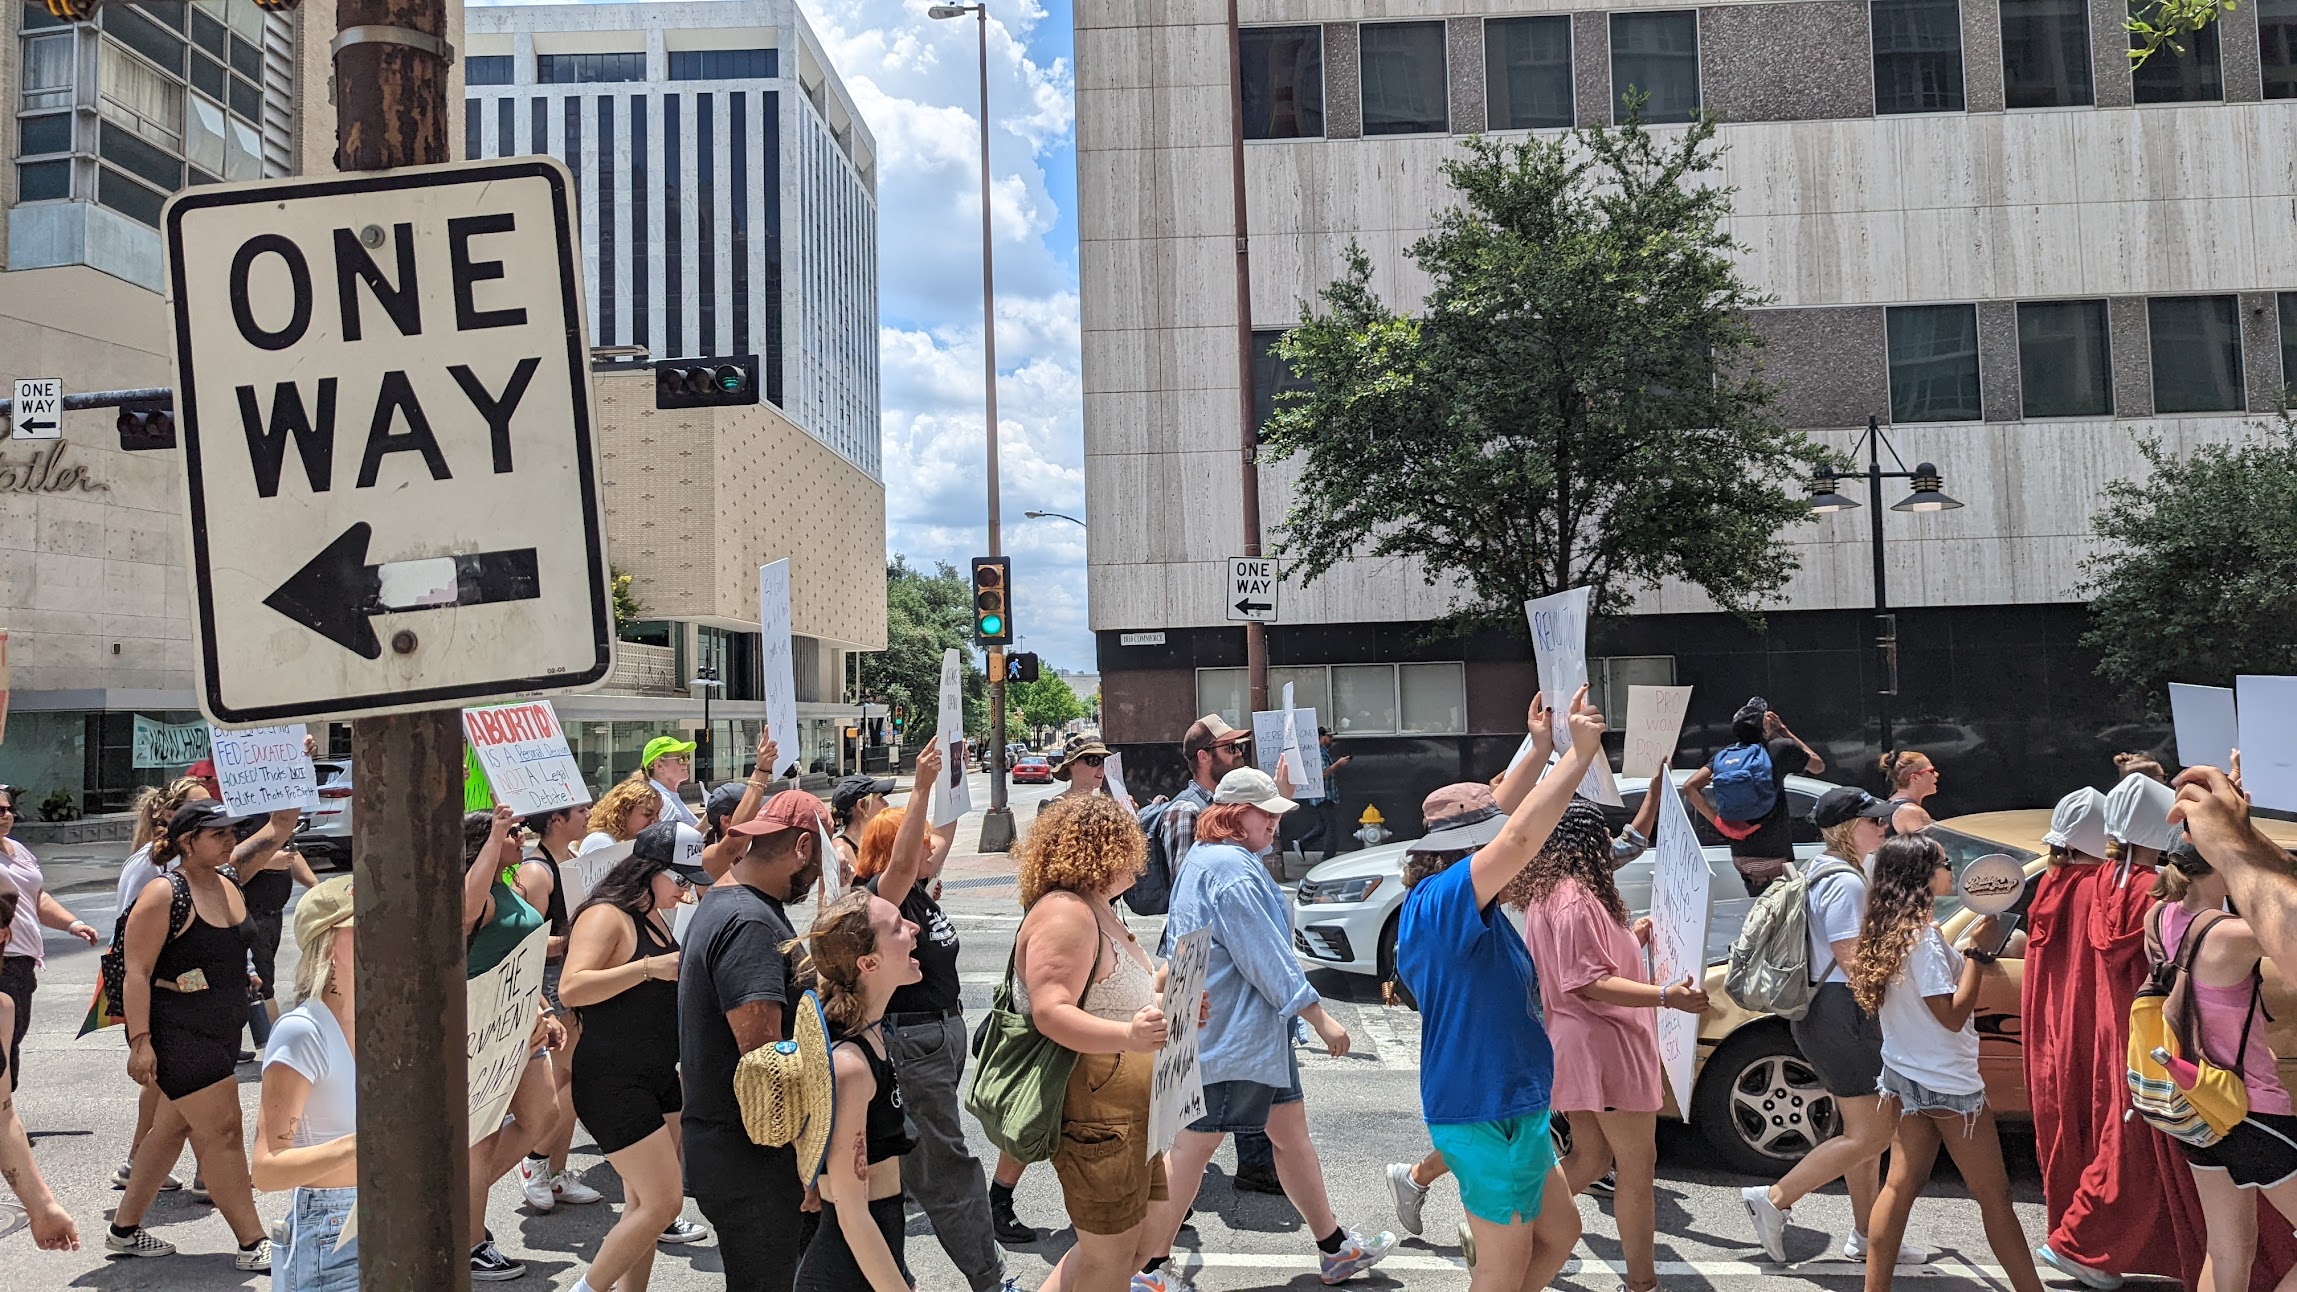 Abortion rights protesters in Dallas on July 2